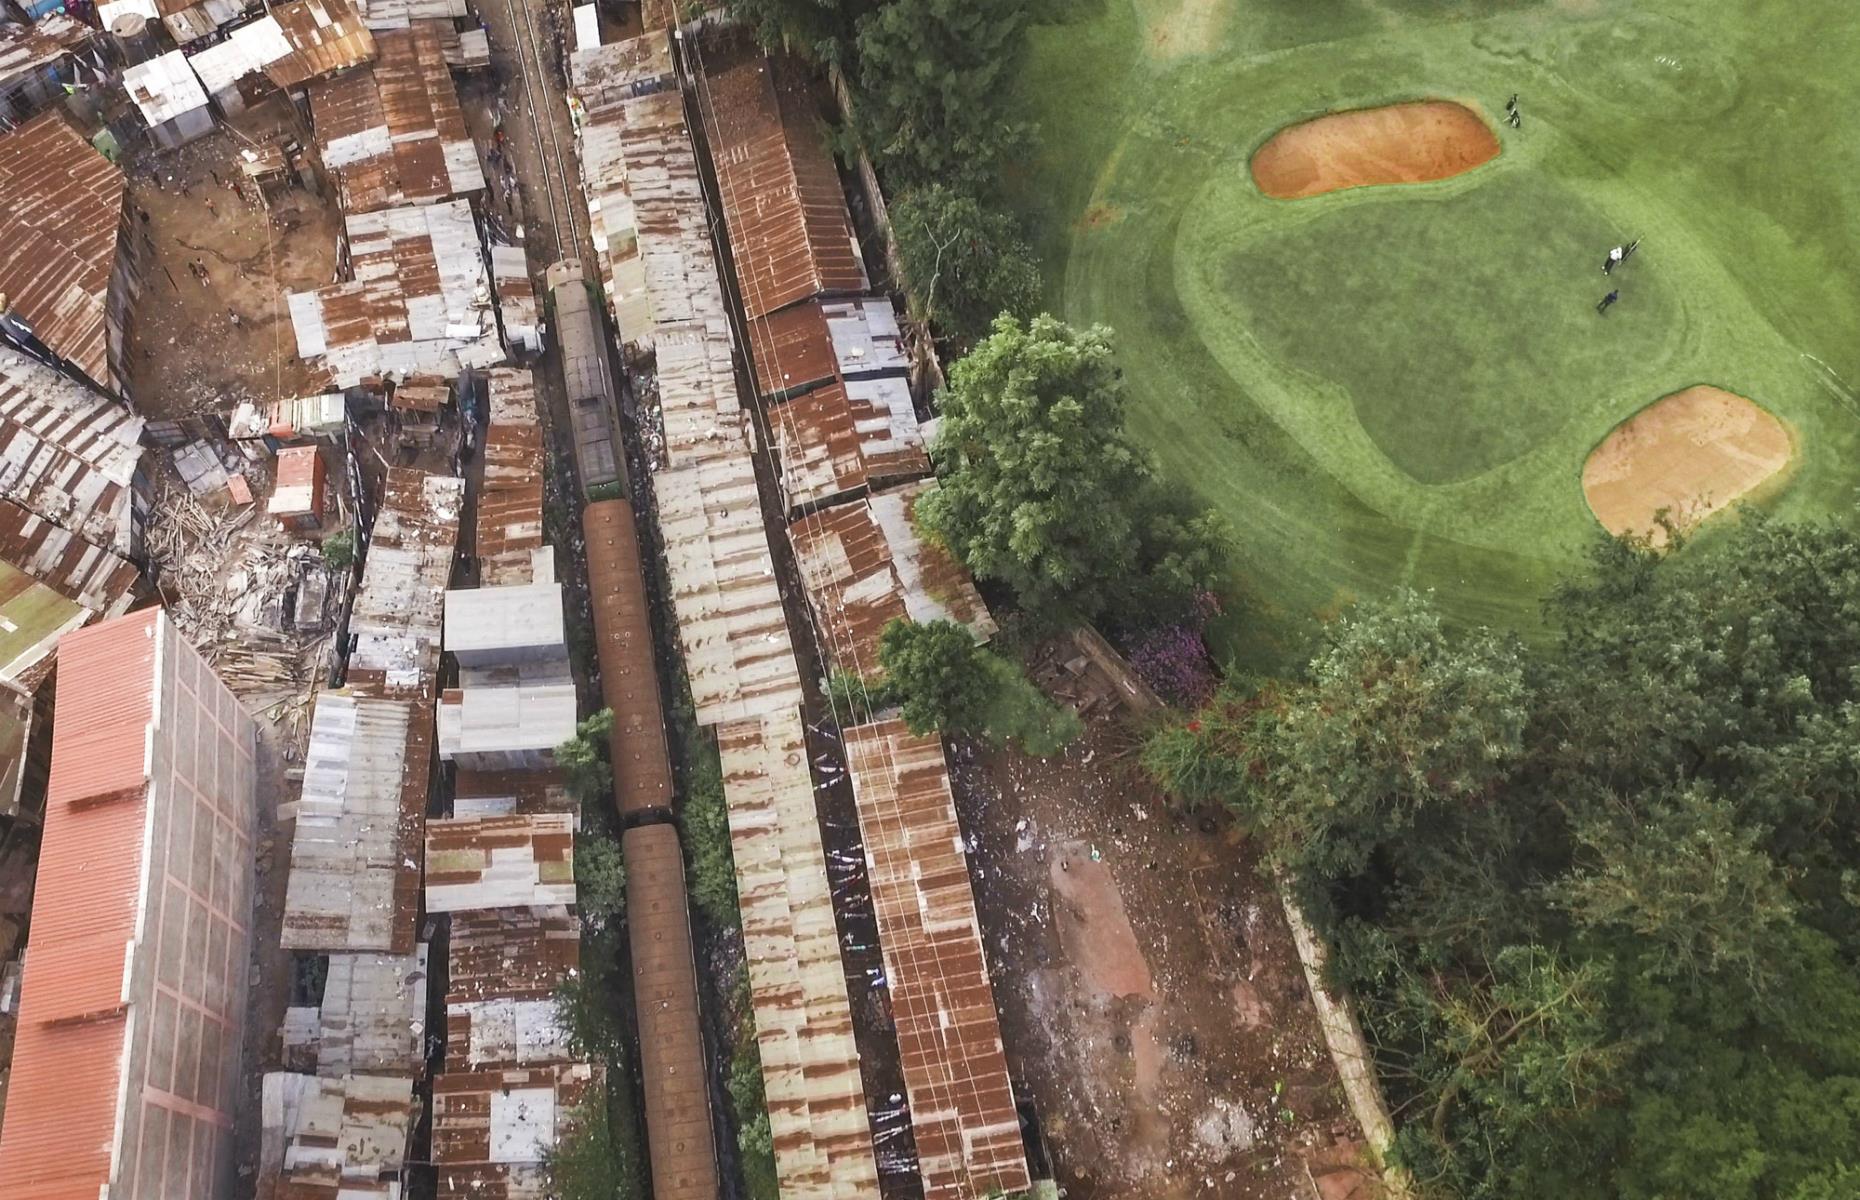 The Royal Nairobi Golf Club in Kenya, which opened in 1906, has the sewage-infested Kibera slum as its neighbor. The rusting tin roofs and the lush greens are separated by a railway line that many children from the slum play on.